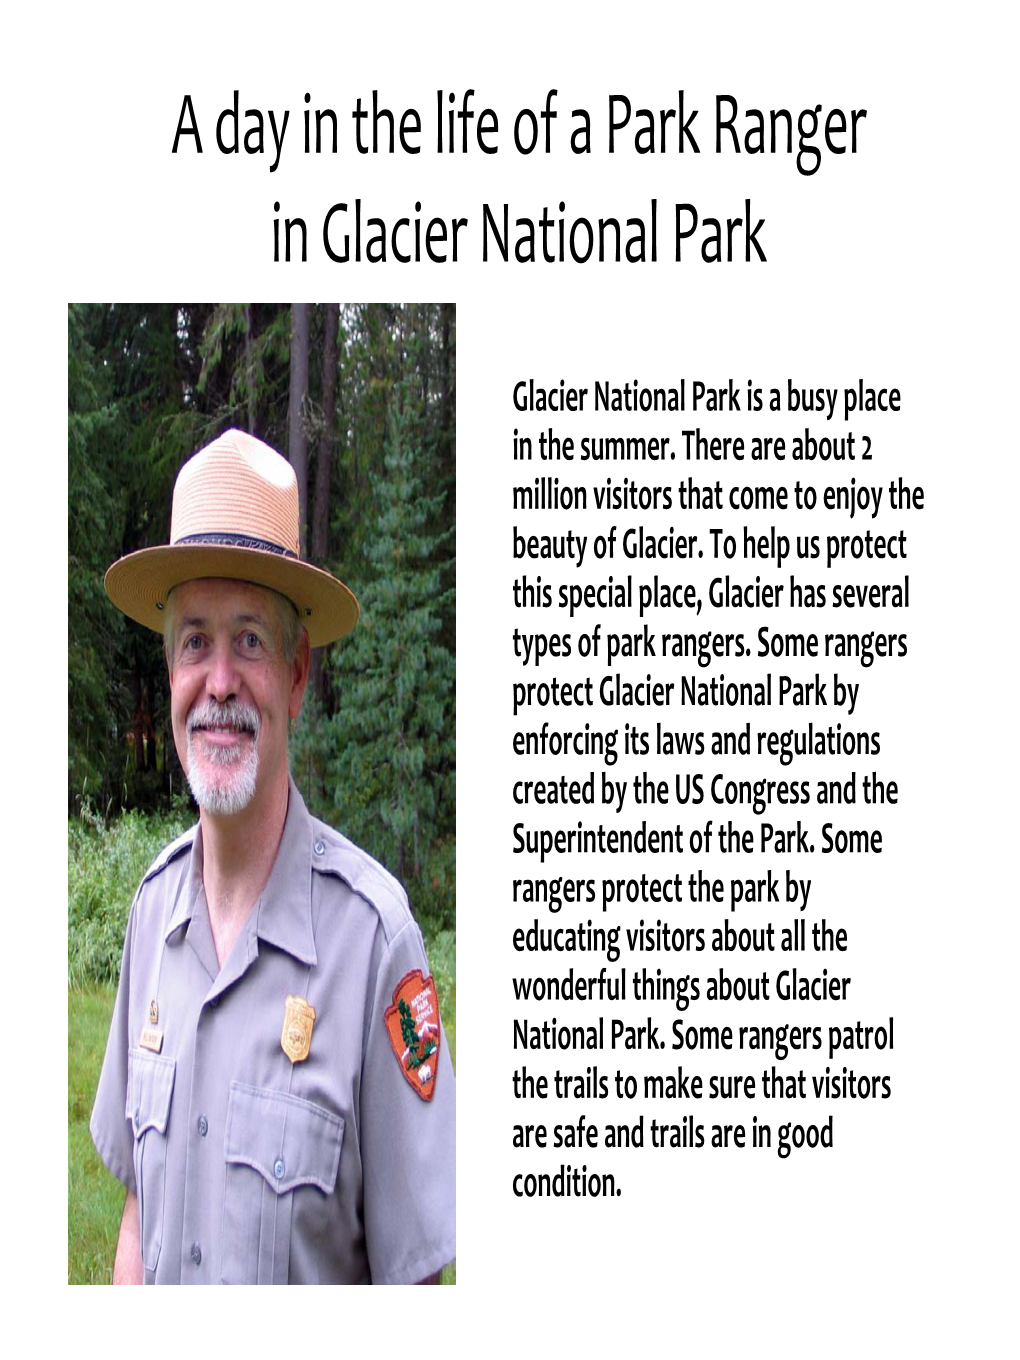 A Day in the Life of a Park Ranger in Glacier National Park